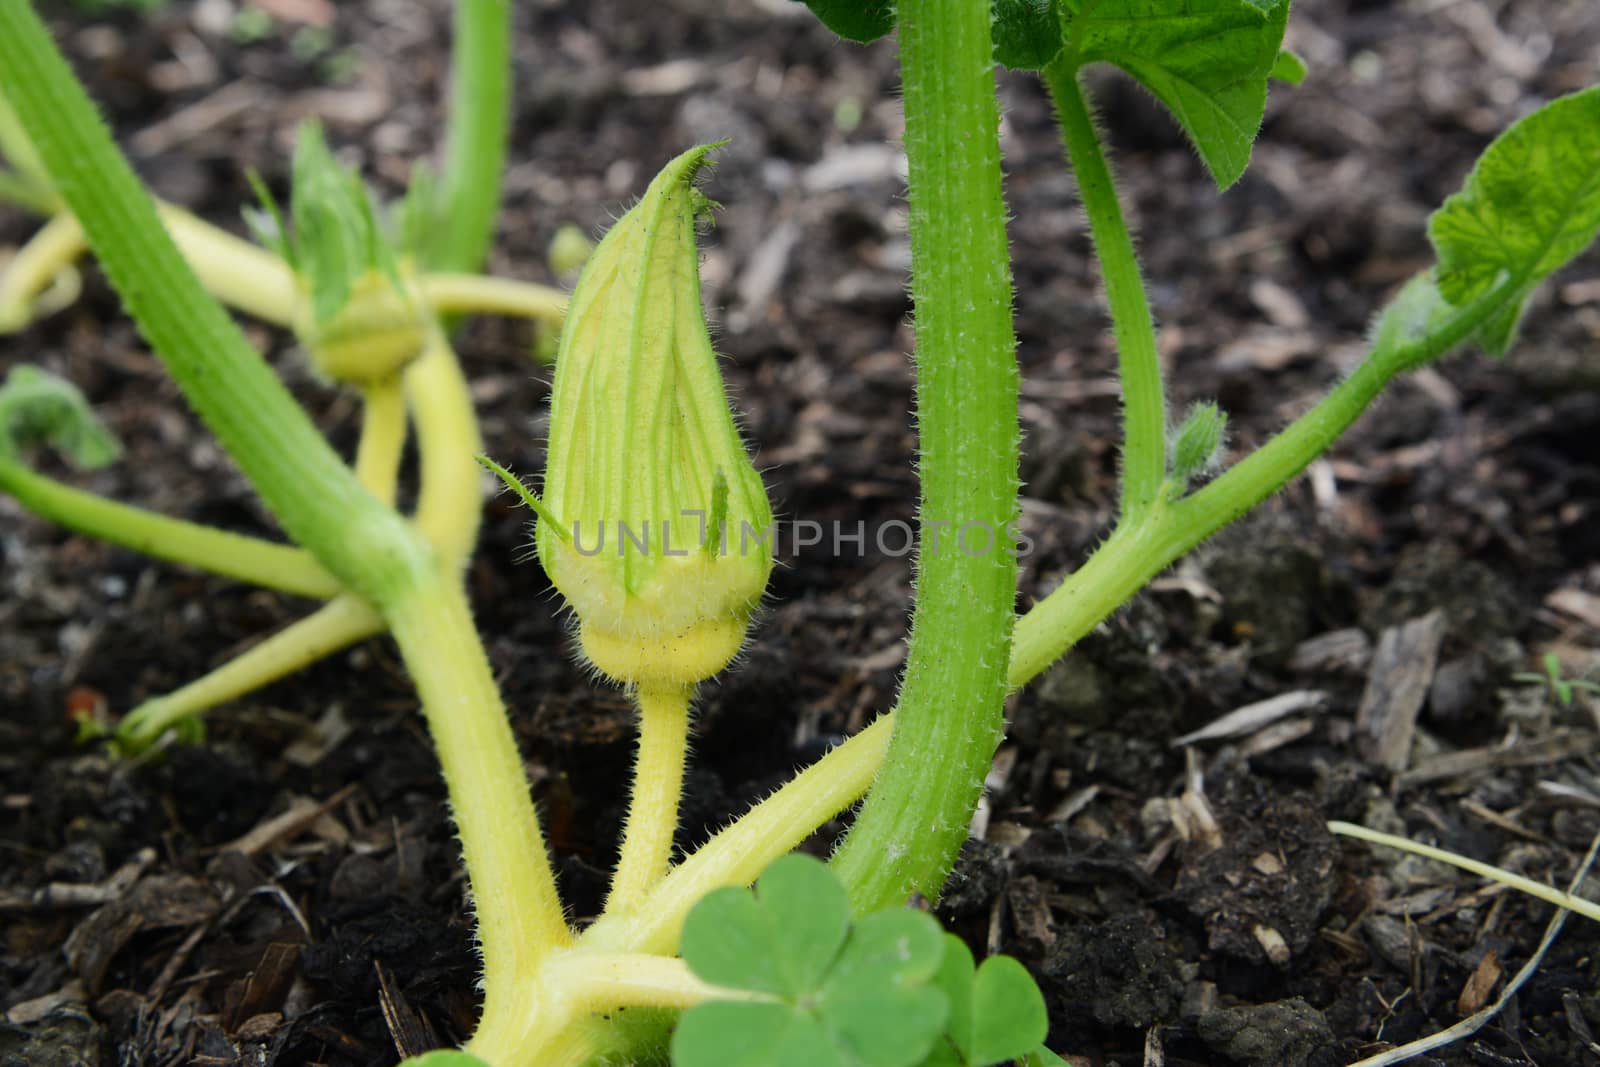 Young Turks Turban gourd female flower by sarahdoow